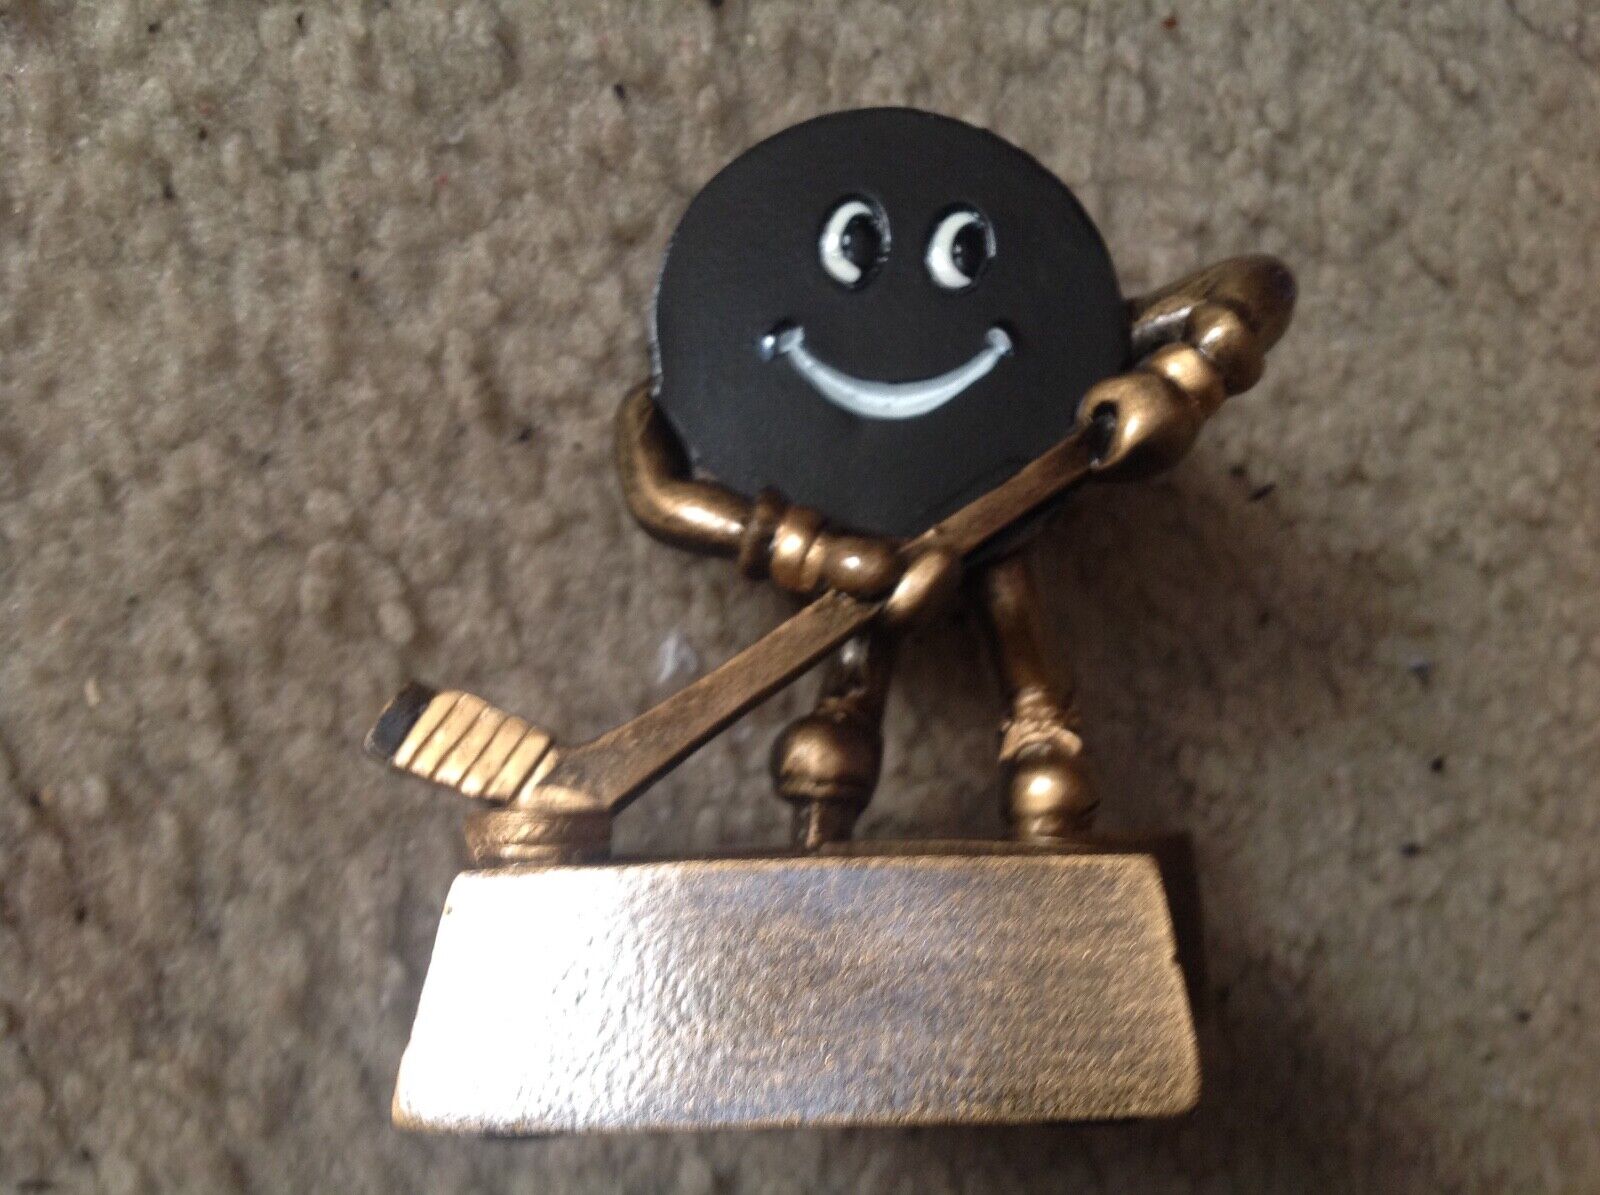 Hockey Trophy 3" Tall 3" Wide New Classic Smiling Hockey Puck Smiley 7 Trophies